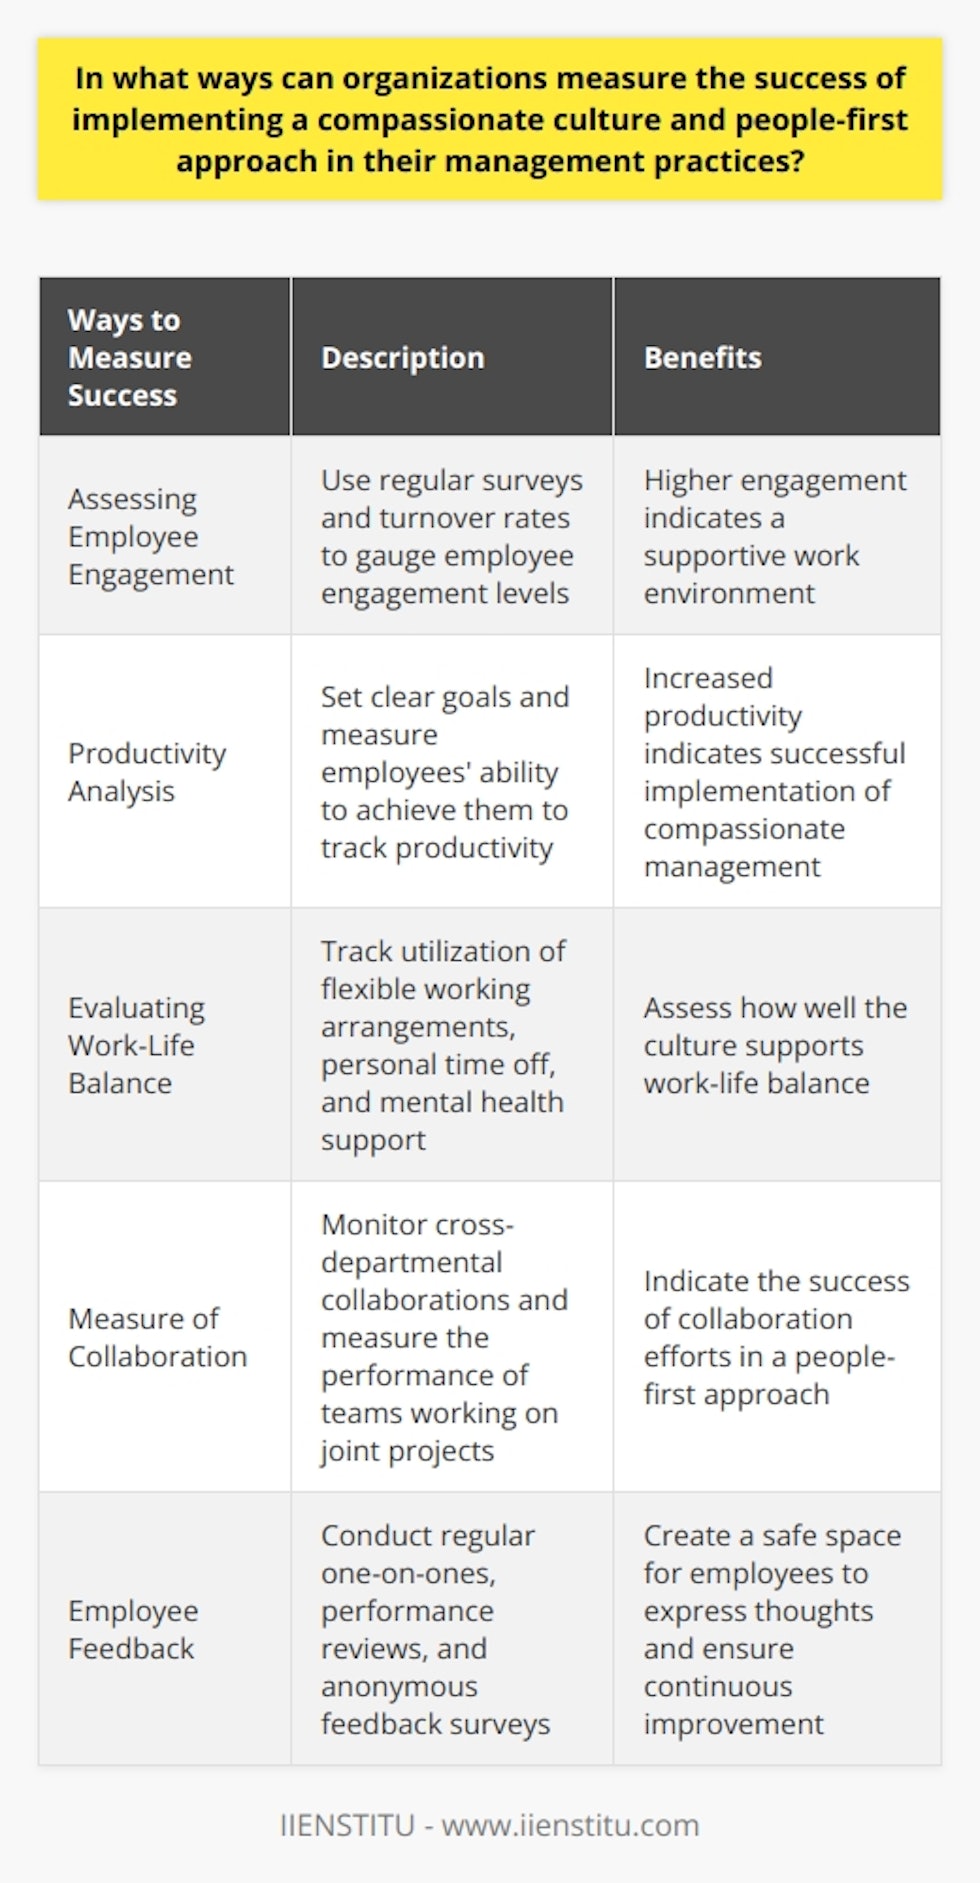 Measuring the success of implementing a compassionate culture and people-first approach in management practices is crucial for organizations. By evaluating various metrics, organizations can gauge the effectiveness of their efforts. Here are some ways to measure success:1. Assessing Employee Engagement: Employee engagement is a key indicator of a supportive work environment. Regular employee satisfaction surveys and monitoring turnover rates can help determine the level of engagement. High levels of engagement and lower turnover rates show that employees feel valued and supported.2. Productivity Analysis: When employees feel valued, they are more likely to be motivated and productive. Setting clear goals and expectations and measuring employees' ability to achieve them can help track productivity levels. Increased productivity often indicates successful implementation of compassionate management practices.3. Evaluating Work-Life Balance: Promoting work-life balance is important for a compassionate culture. Offering flexible working arrangements, personal time off, and mental health support are ways organizations can support work-life balance. By tracking the utilization of these programs and gathering feedback from employees, organizations can assess how well their culture supports work-life balance.4. Measure of Collaboration: Fostering a collaborative atmosphere is essential in a people-first management approach. Monitoring the frequency of cross-departmental collaborations and measuring the performance of teams working on joint projects can indicate the success of collaboration efforts. Encouraging open communication and celebrating team accomplishments are valuable indicators of successful collaboration.5. Employee Feedback: Actively seeking feedback from employees is a straightforward method to assess the success of a compassionate organizational culture. Conducting regular one-on-ones, performance reviews, and anonymous feedback surveys provides employees a safe space to express their thoughts and concerns. By addressing any issues, leaders can demonstrate their commitment to a people-first management approach and ensure continuous improvement.In summary, measuring the success of implementing a compassionate culture and people-first management approach involves assessing employee engagement, productivity, work-life balance, collaboration, and employee feedback. By tracking these metrics, organizations can make necessary adjustments to their management practices and create a supportive and inclusive environment that drives performance and overall business success.